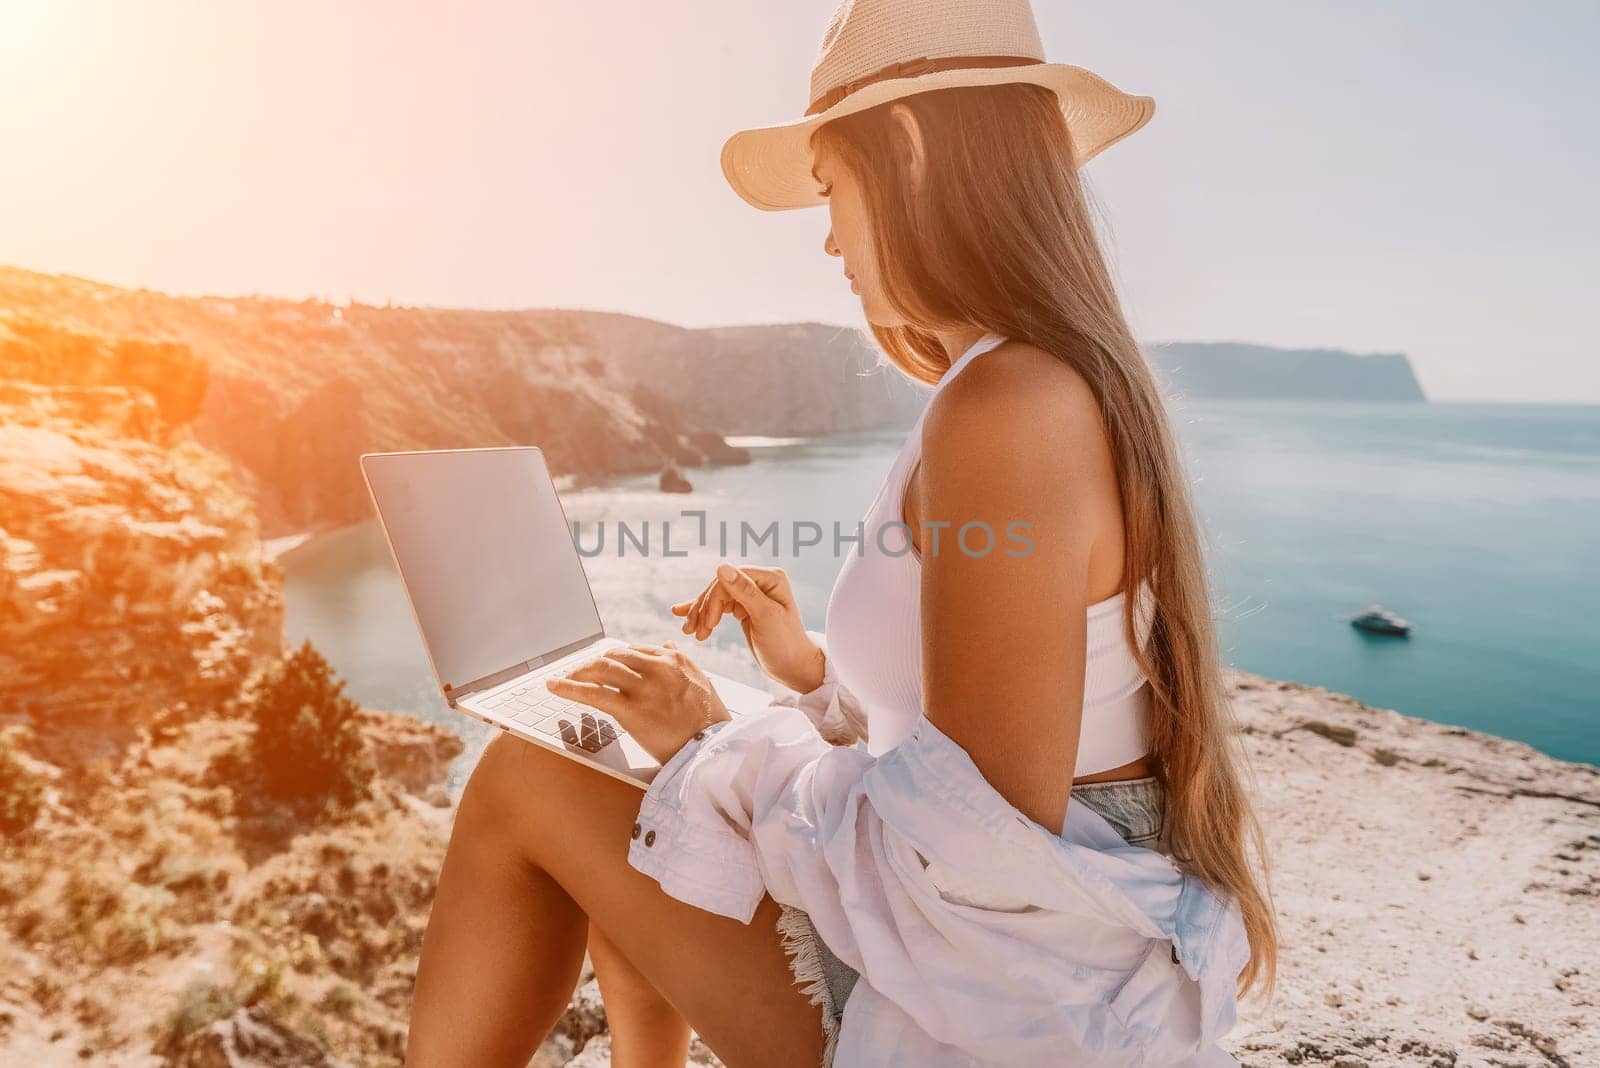 Digital nomad, Business woman working on laptop by the sea. Pretty lady typing on computer by the sea at sunset, makes a business transaction online from a distance. Freelance remote work on vacation